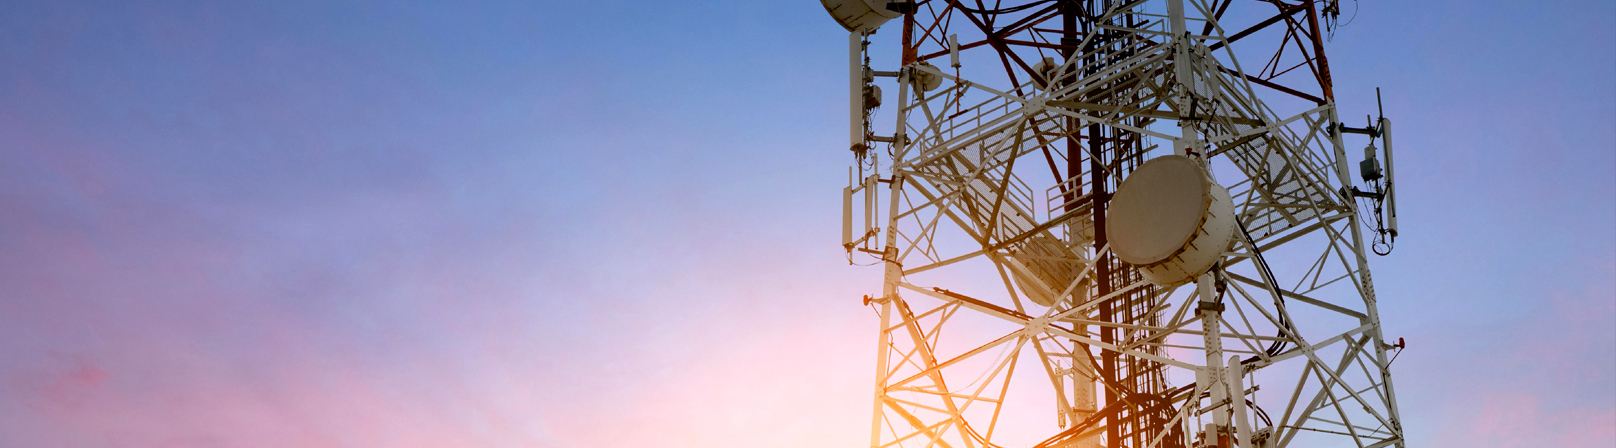 BWL Professional Bid Services support telecommunications contractor to secure a £10m contract